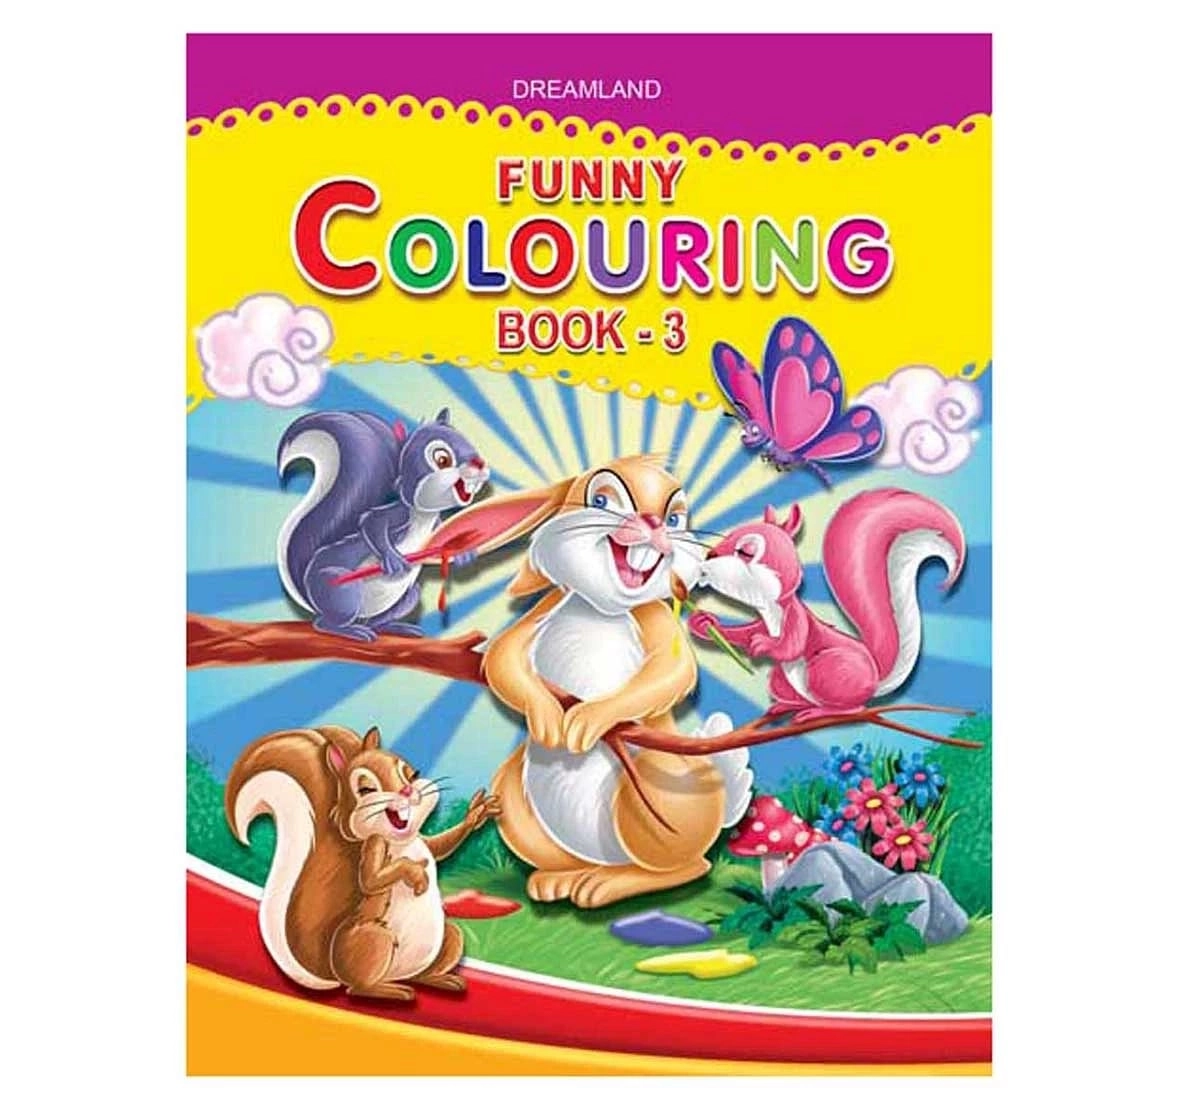 Dreamland Paper Back Funny Colouring Book Part 3 for kids 3Y+, Multicolour